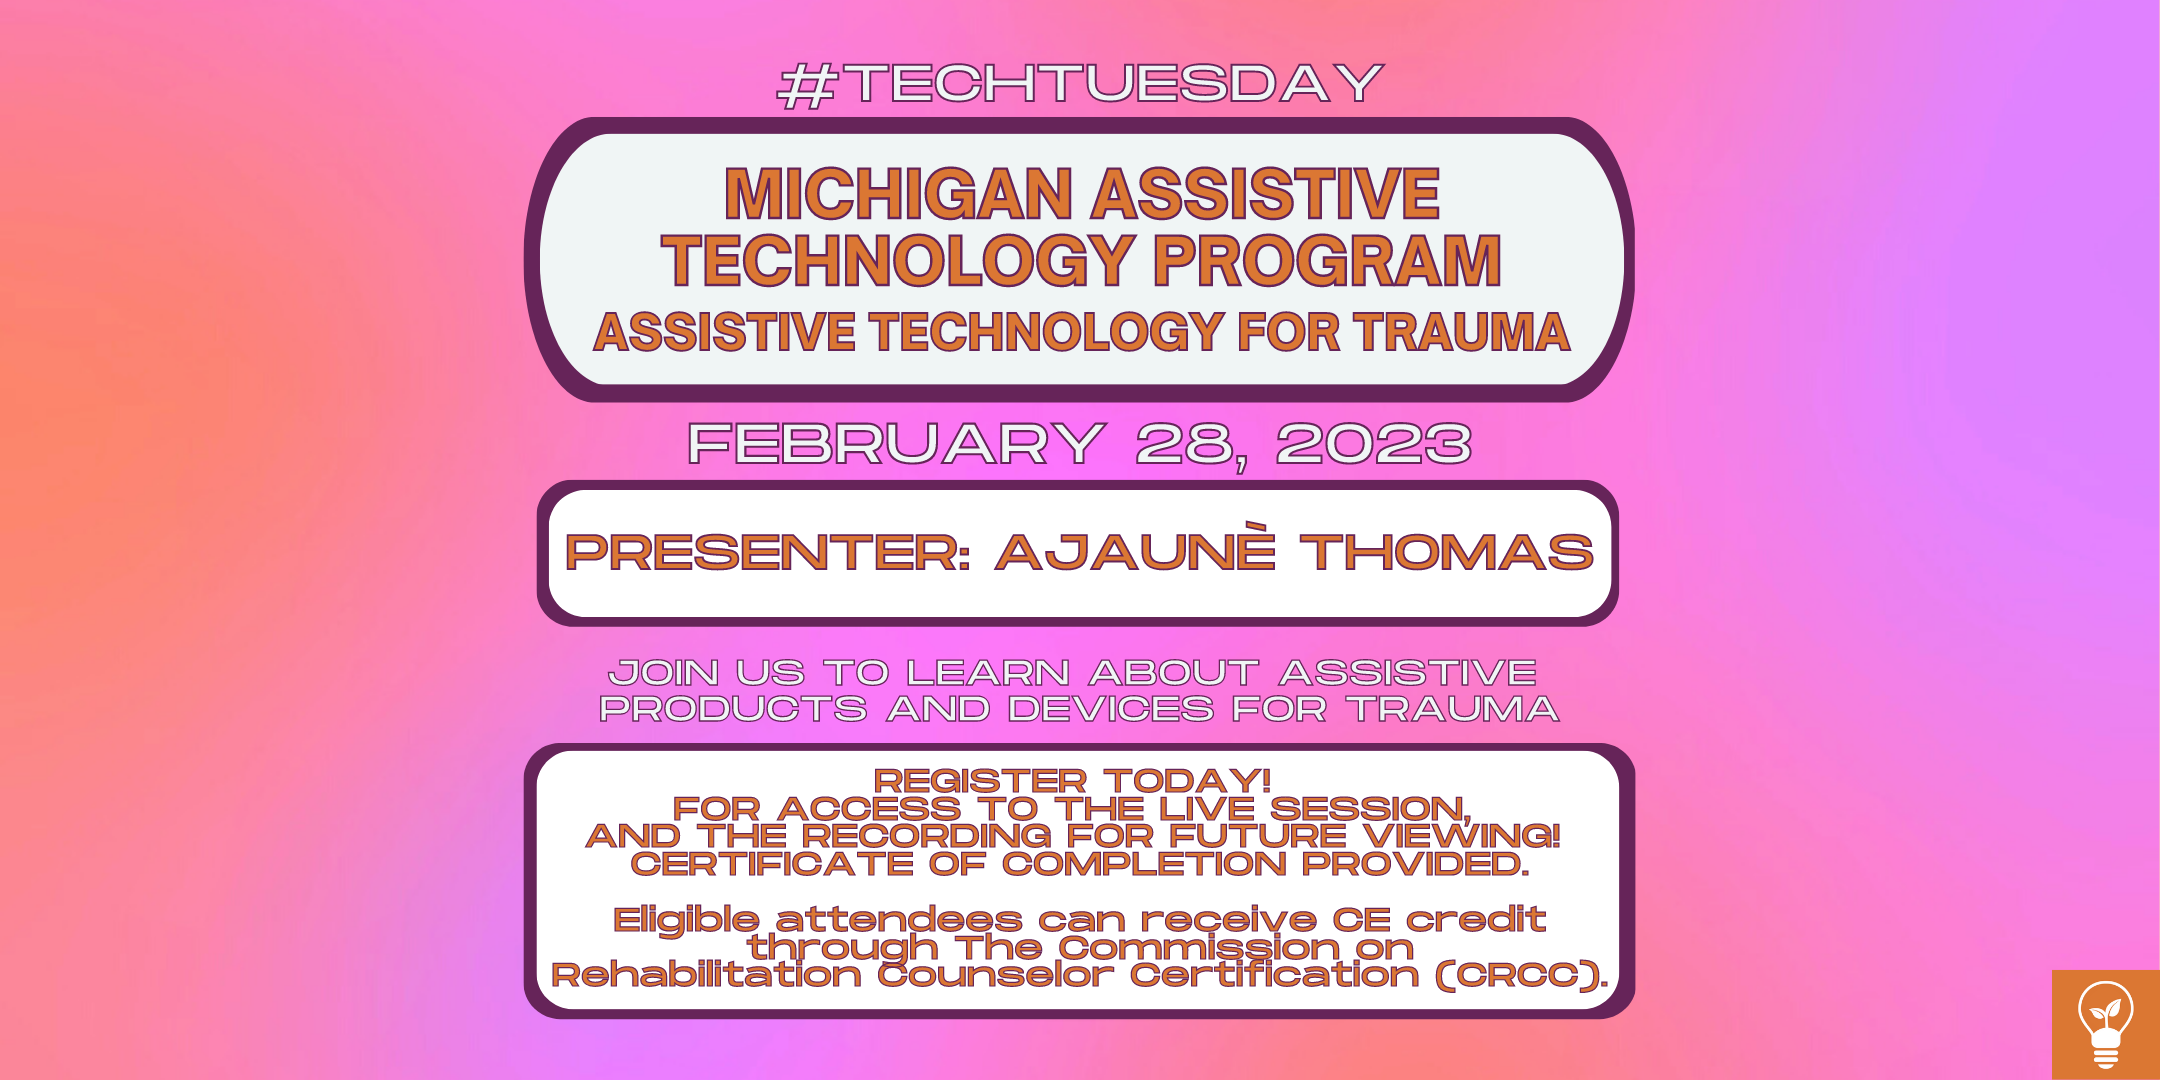 [Image Description: A poster with images and text over a purple and orange gradient background. The text is from top to bottom and reads, “#TechTuesday, Michigan Assistive Technology Program, Assistive Technology for Trauma, February 28 2023, Presenter: Ajaune Thomas, Join us to learn about assistive products and devices for Trauma, Register Today, For access to the live session and recording for future viewing, Certificate of completion provided, Eligible attendees can receive CE credit through The Commission on Rehabilitation Counselor Certification (CRCC)”. At the bottom right is a logo. The logo is a white lightbulb with a seedling in it over and orange background. End of image description.]